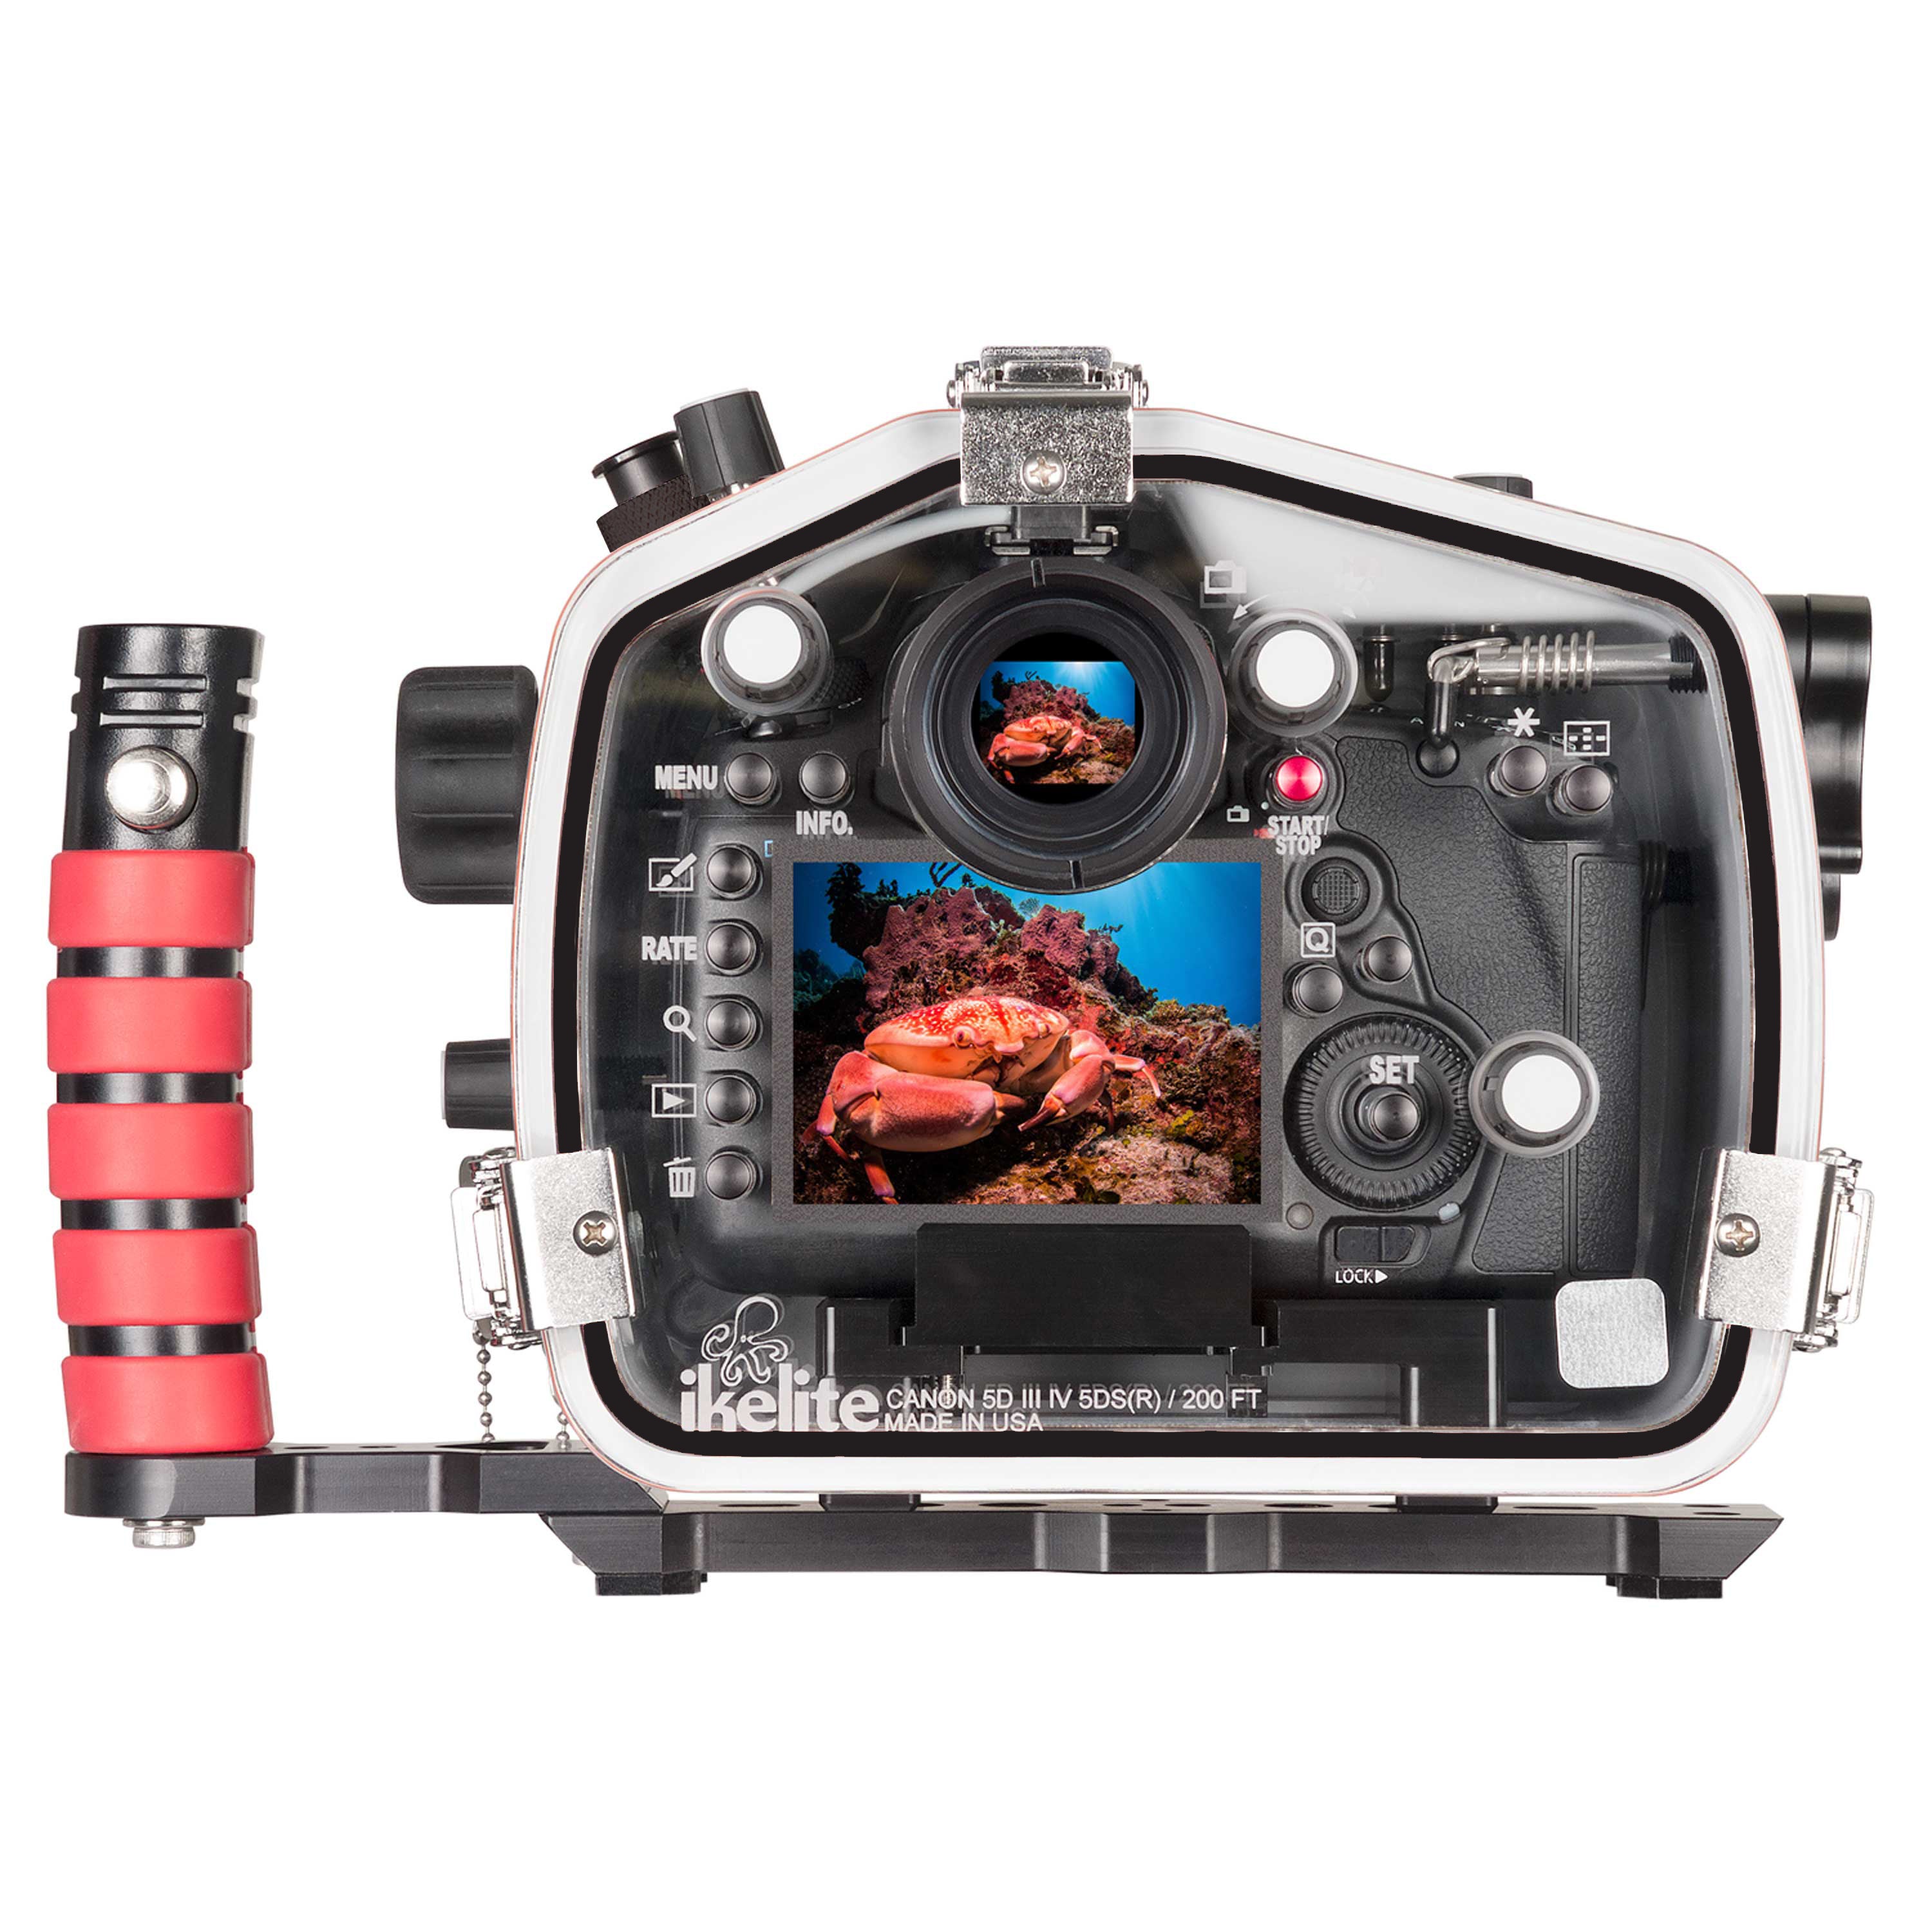 200DL Underwater Housing for Canon EOS 5D Mark III, 5D Mark IV, 5DS, 5DS R  DSLR Cameras